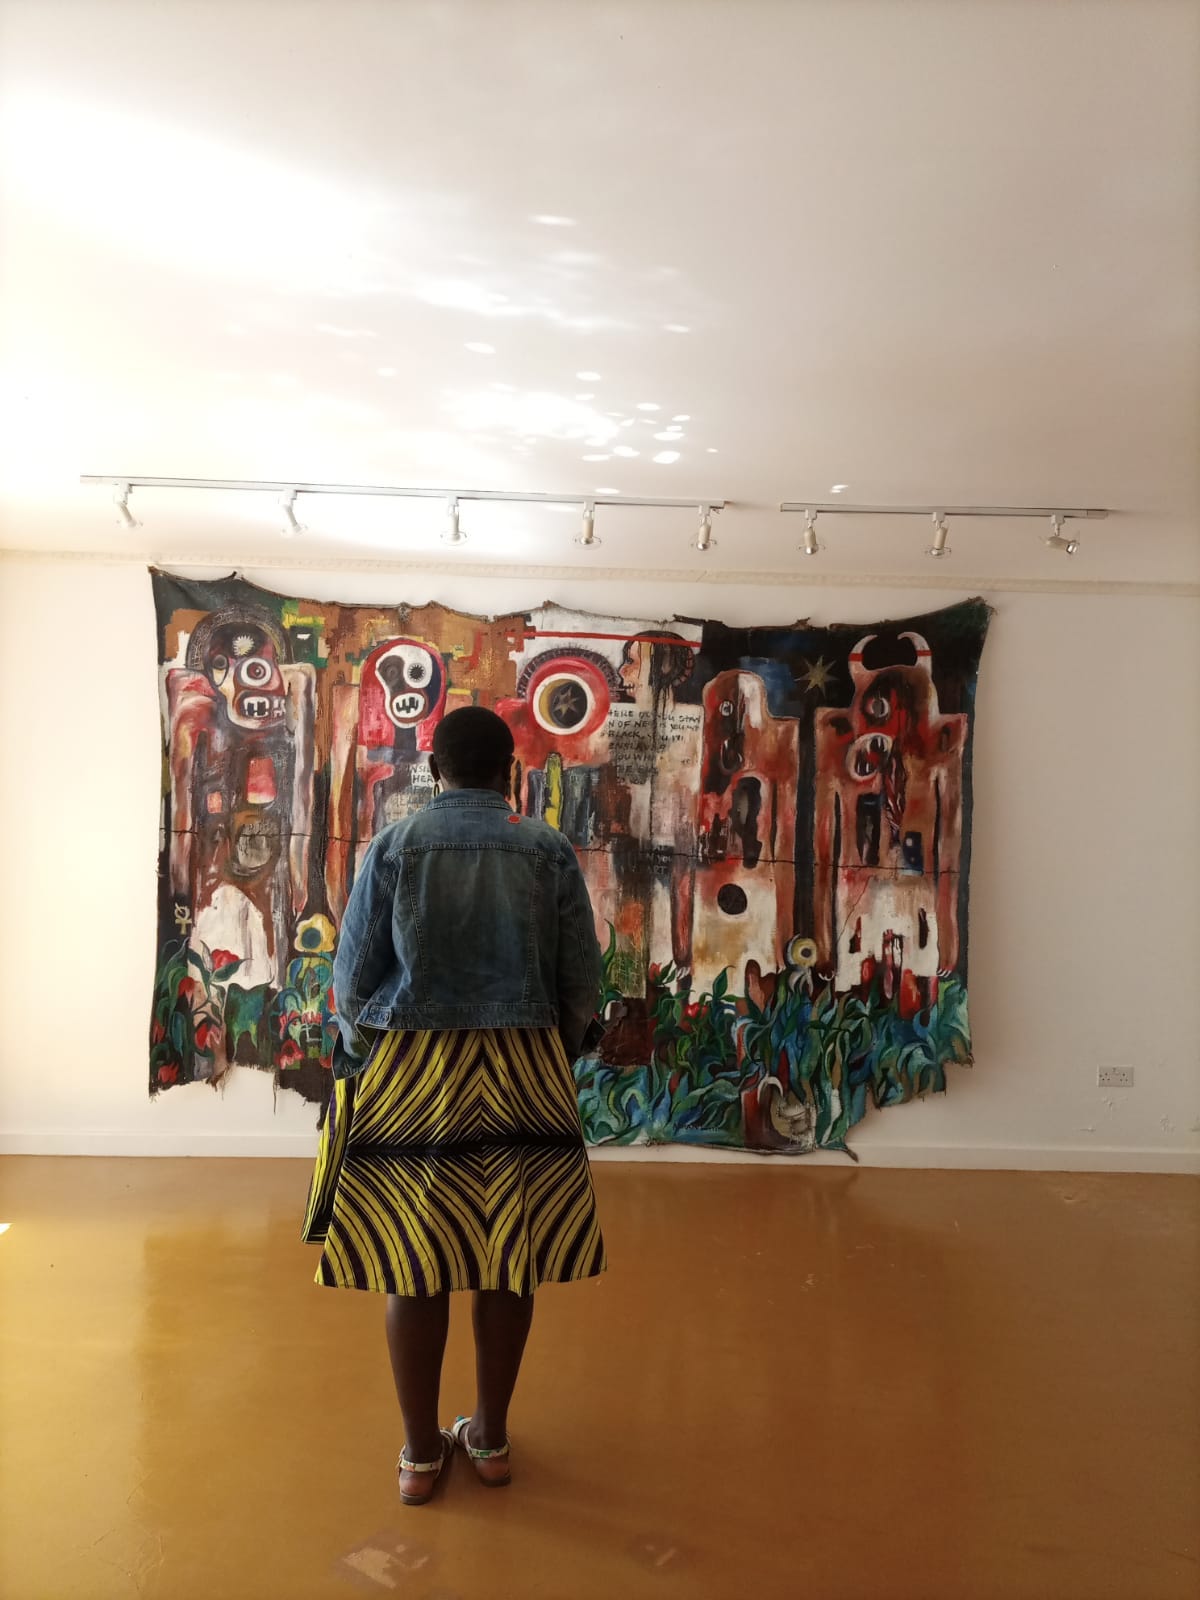 Black person with short hair wearing yellow and purple dress, denim jacket and sandals standing in front of a large painting